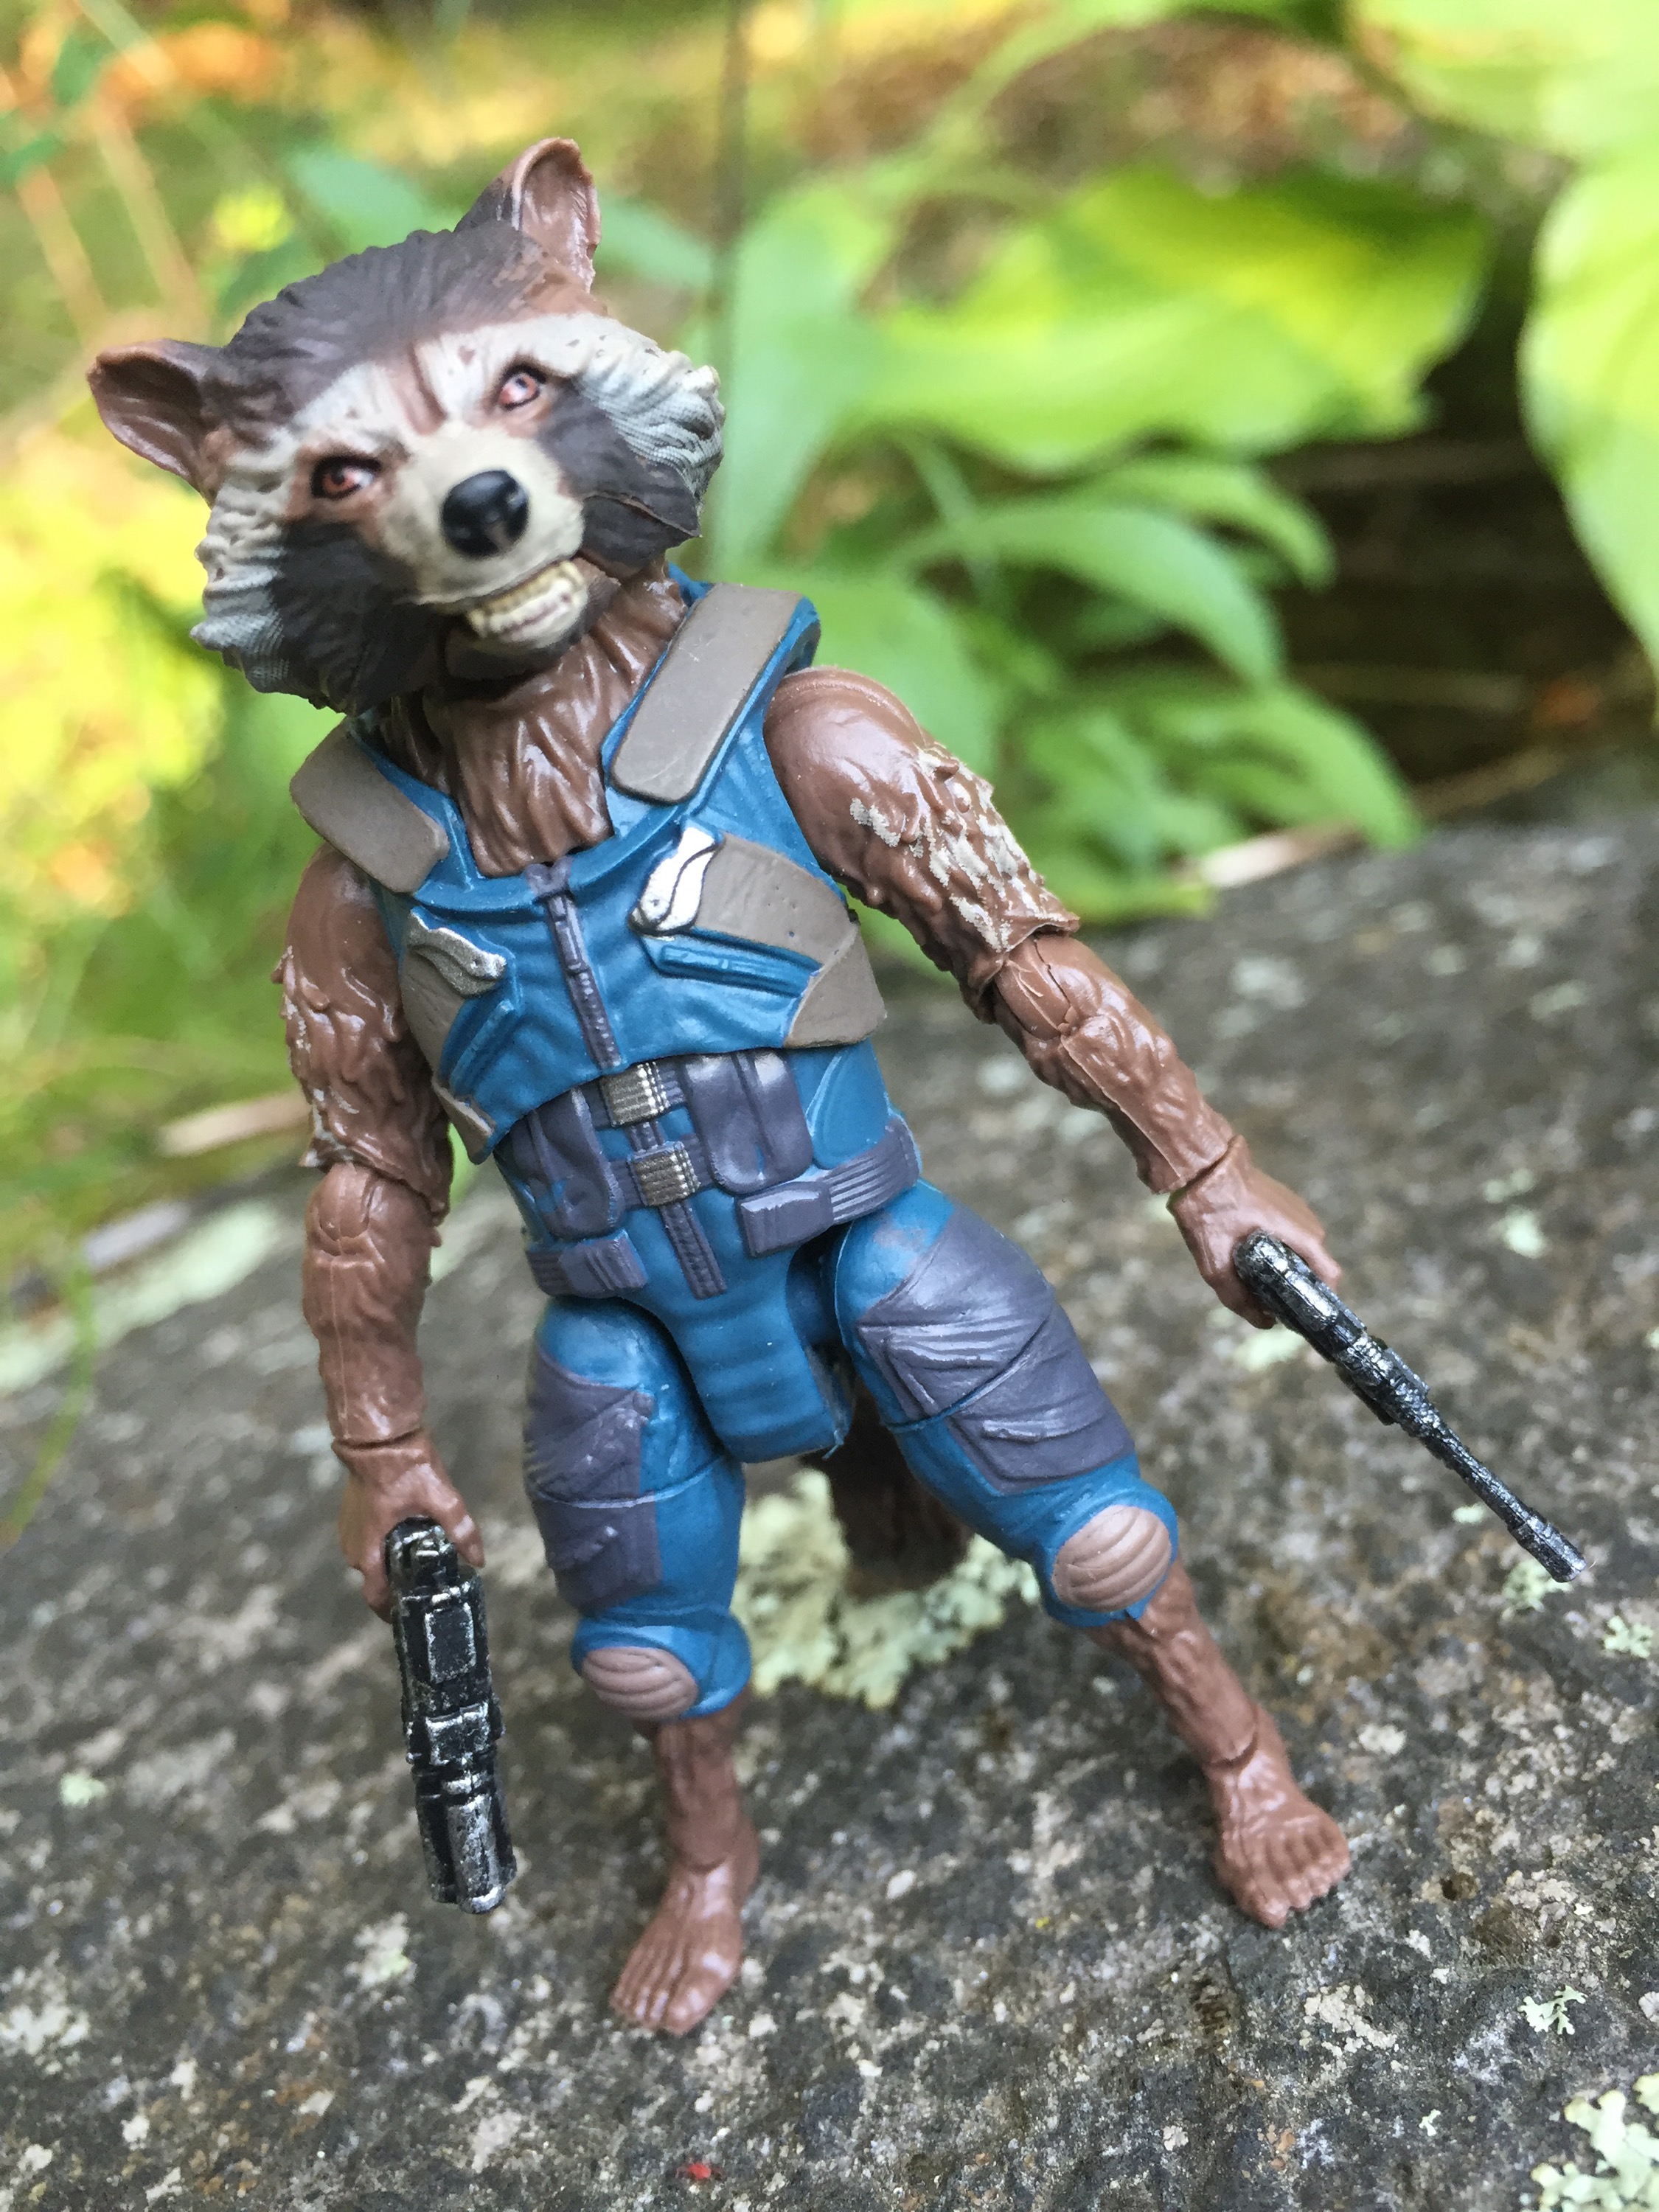 Marvel Legends Rocket Raccoon doesn’t just have two guns, though–he’s also ...